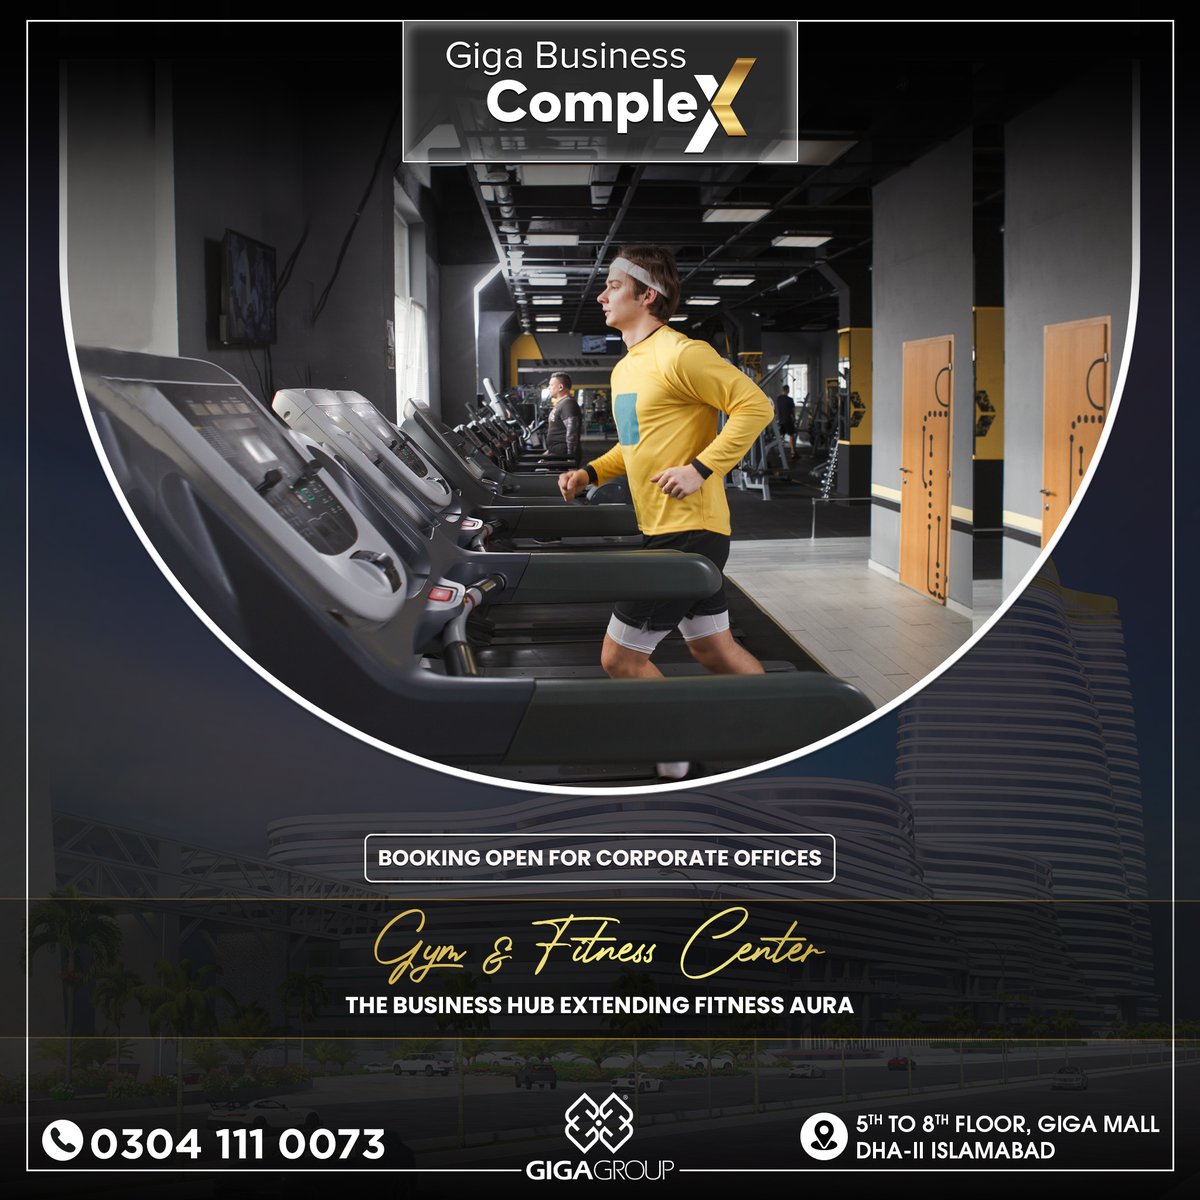 The business hub extending fitness aura! Enjoy luxury amenities while staying energized for your business activities at your workplace and where success supports both the corporate world and your well-being. Avail the best investment opportunity by booking your office in 𝐆𝐢𝐠𝐚…